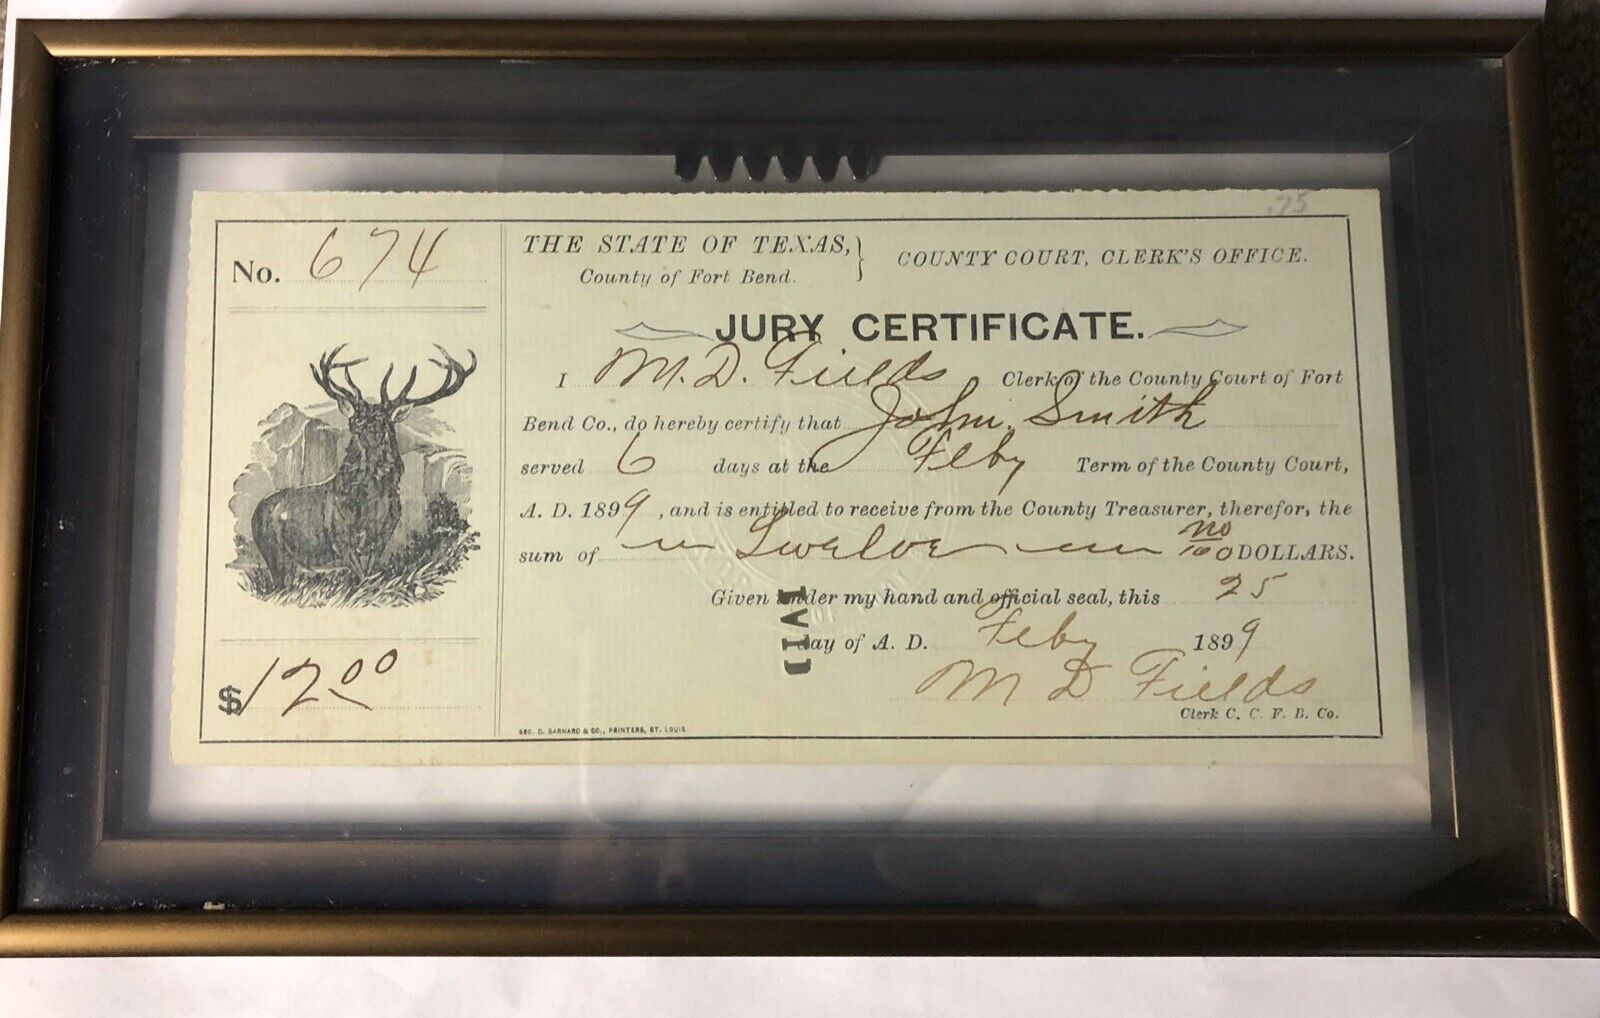 ANTIQUE 1899 STATE OF TEXAS COUNTY OF FORT BEND JURY CERTIFICATE CHECK JURY DUTY